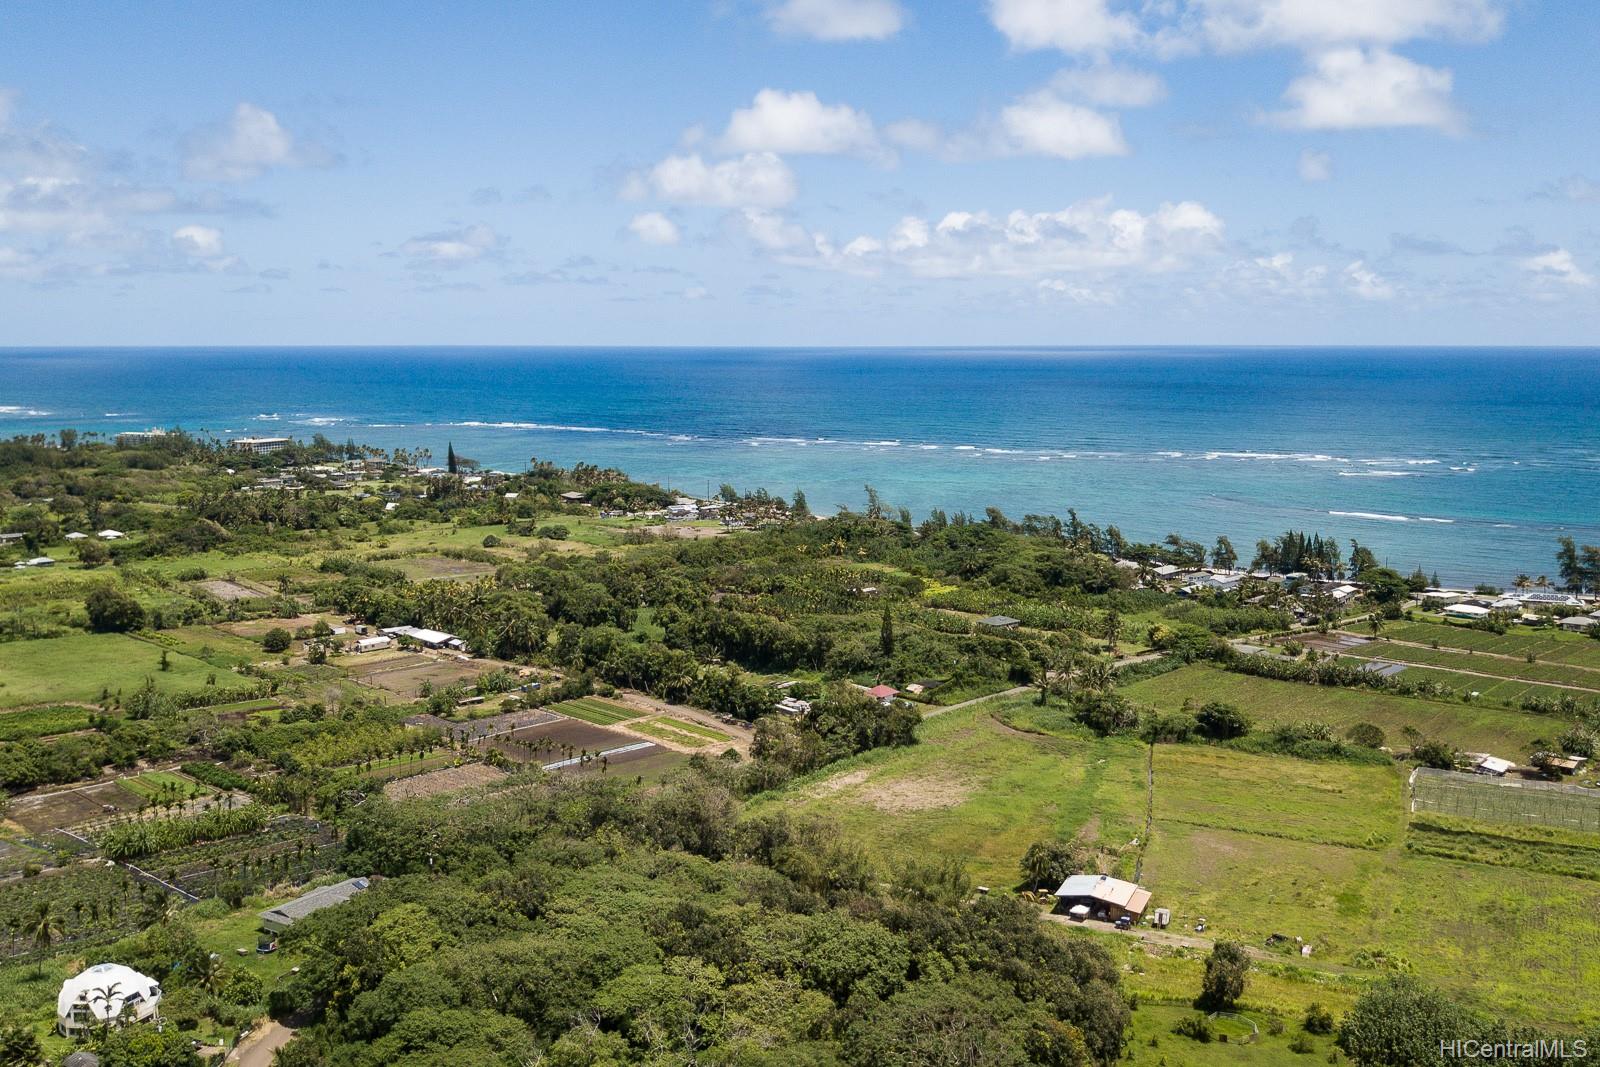 53-XXXX Kamehameha Hwy  Hauula, Hi vacant land for sale - photo 4 of 4